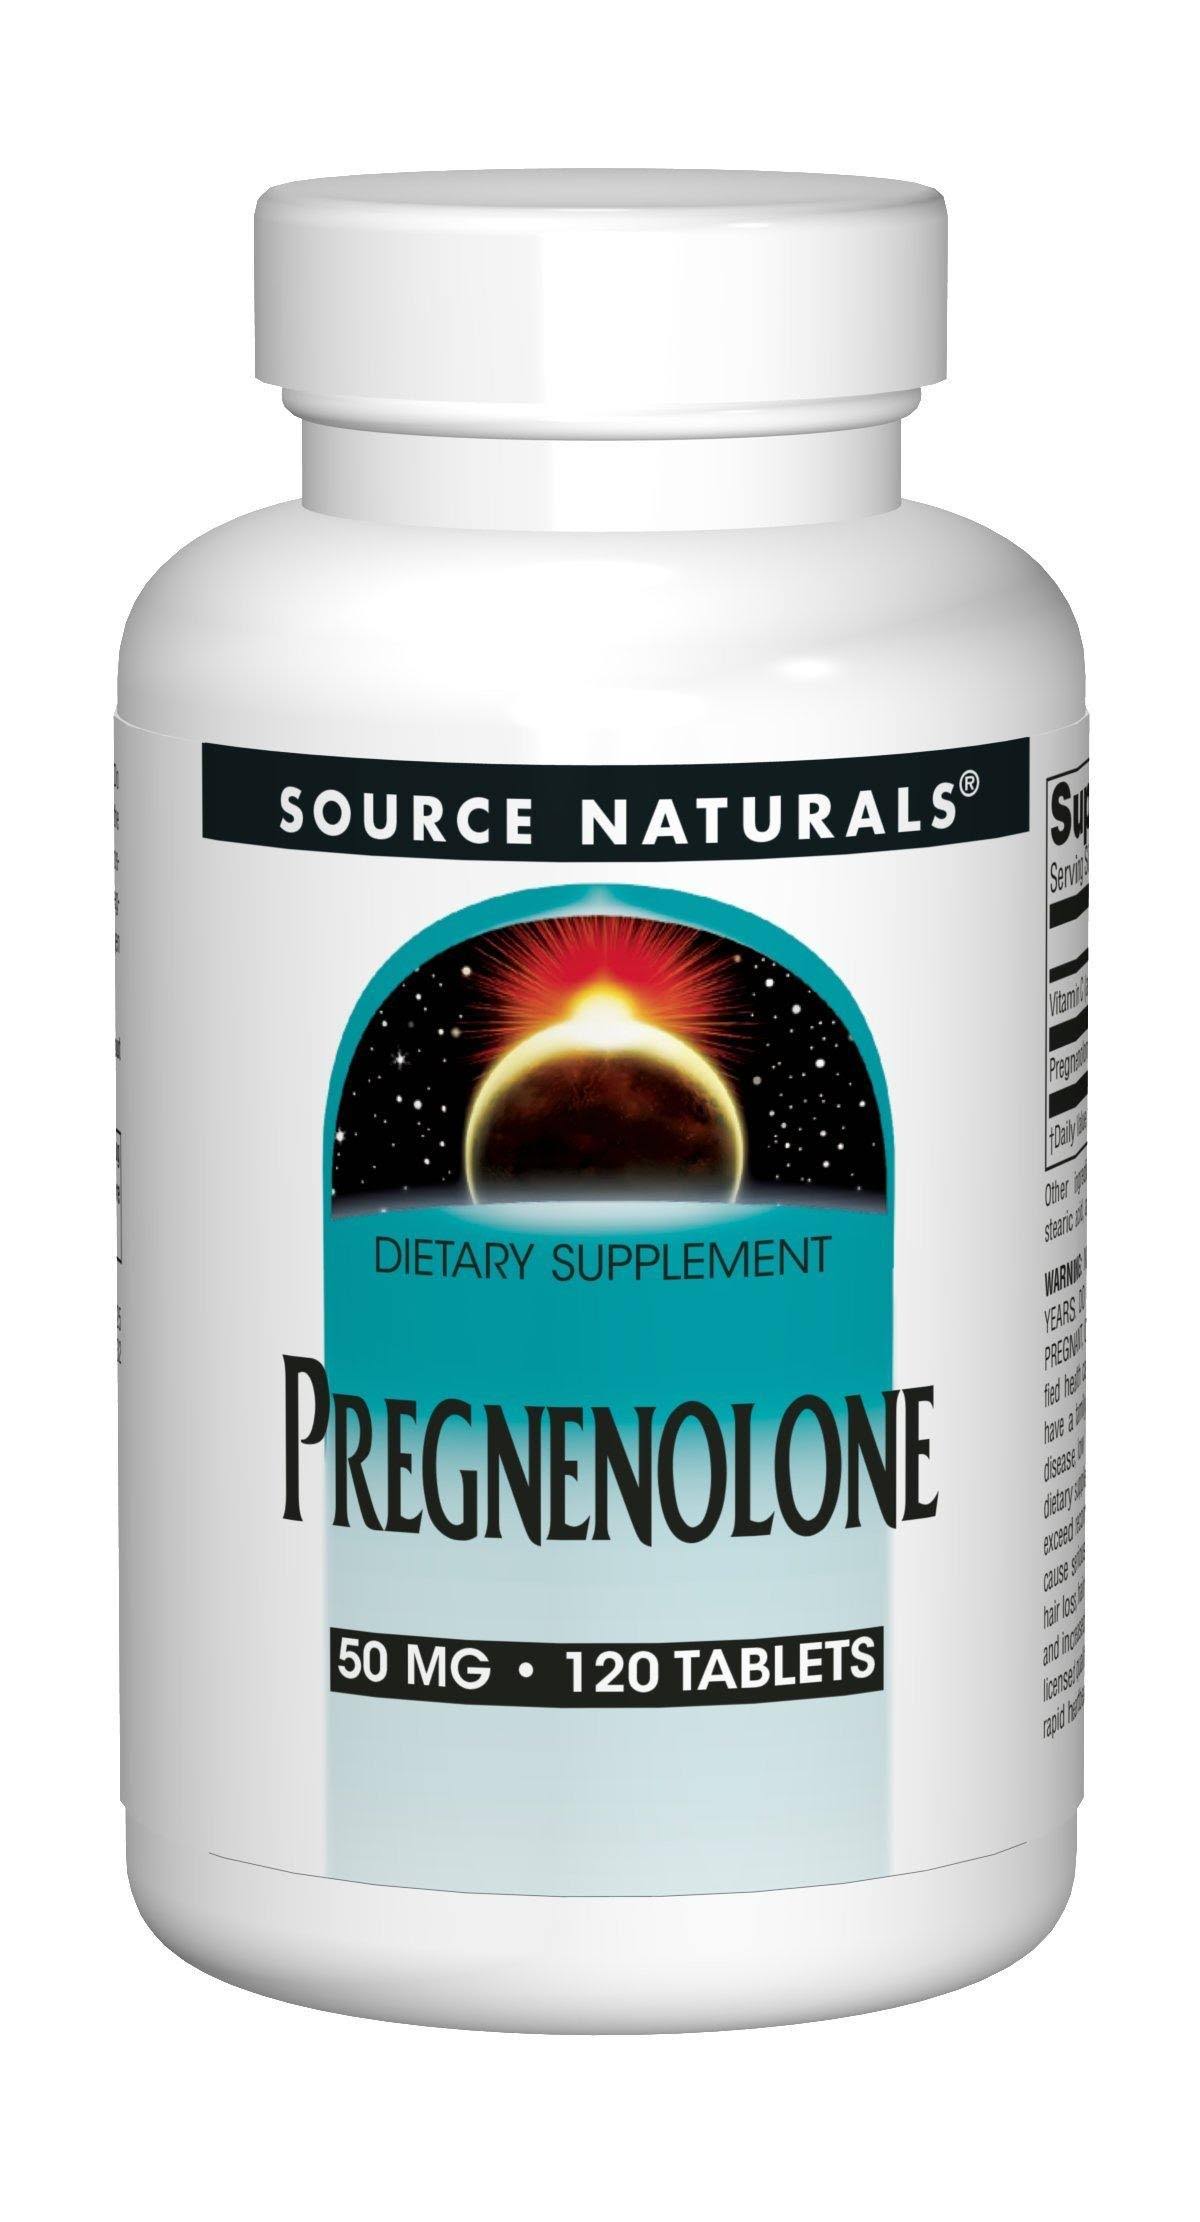 Source Naturals Pregnenolone Supplement - 50mg, 120 Tablets